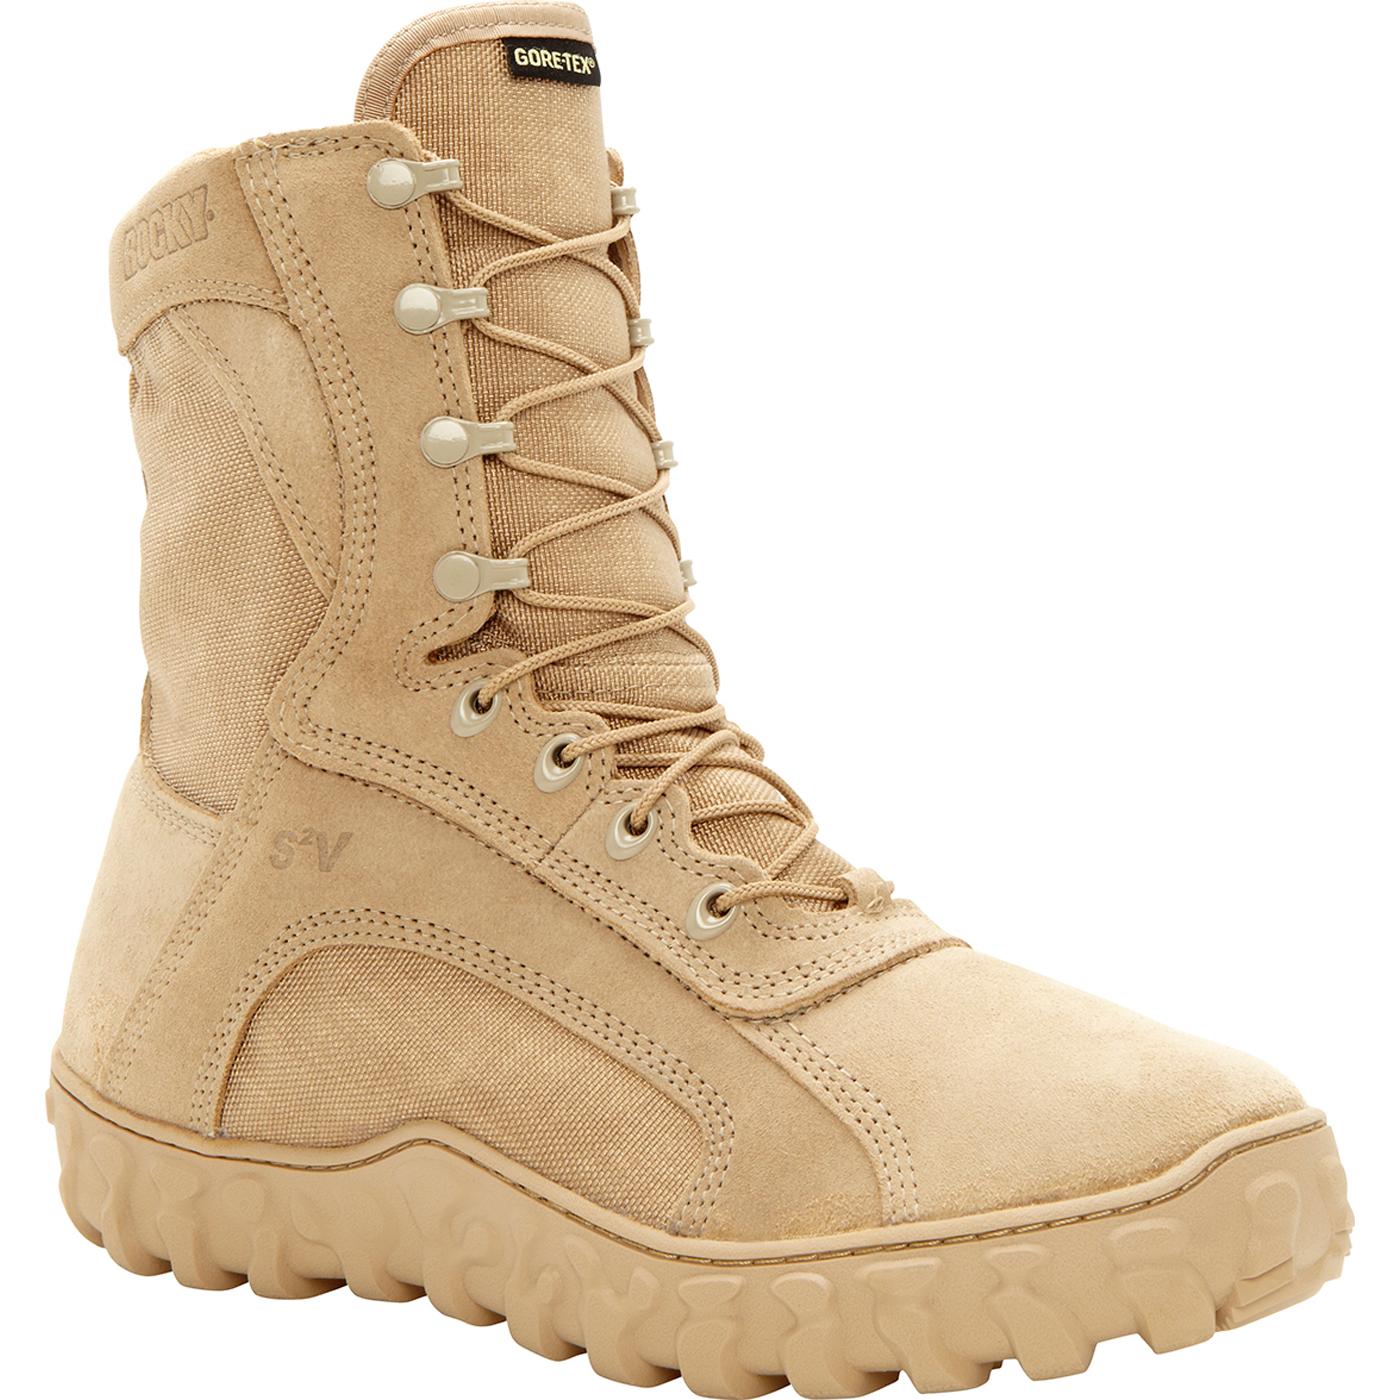 Rocky S2V: Waterproof Insulated Military Boots